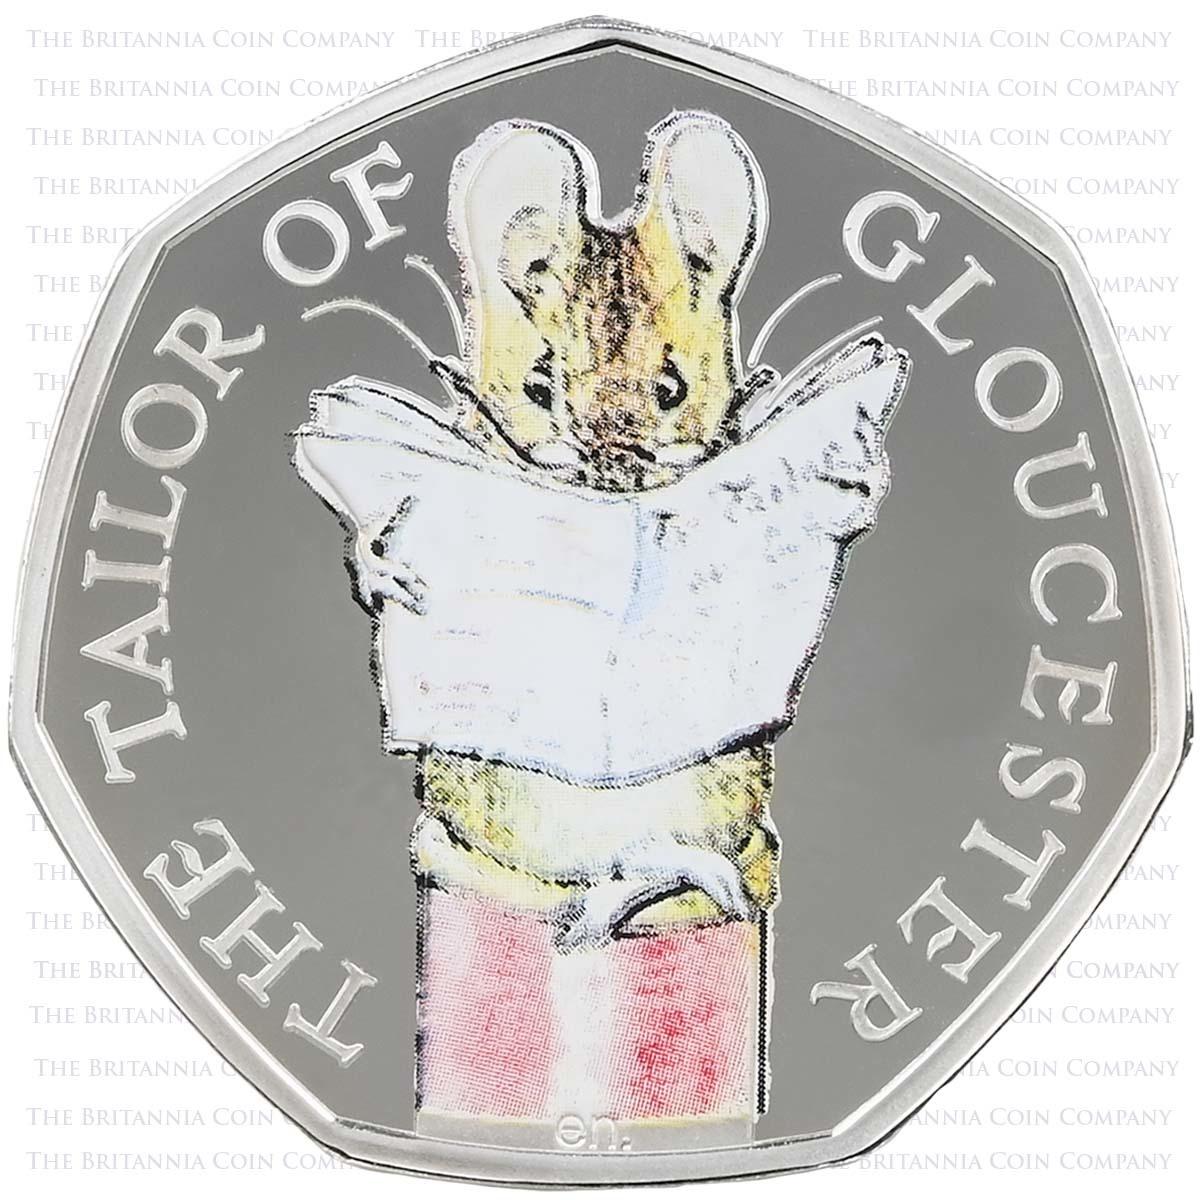 UK18TGSP 2018 Beatrix Potter The Tailor of Gloucester Fifty Pence Colour Printed Silver Proof Coin Reverse